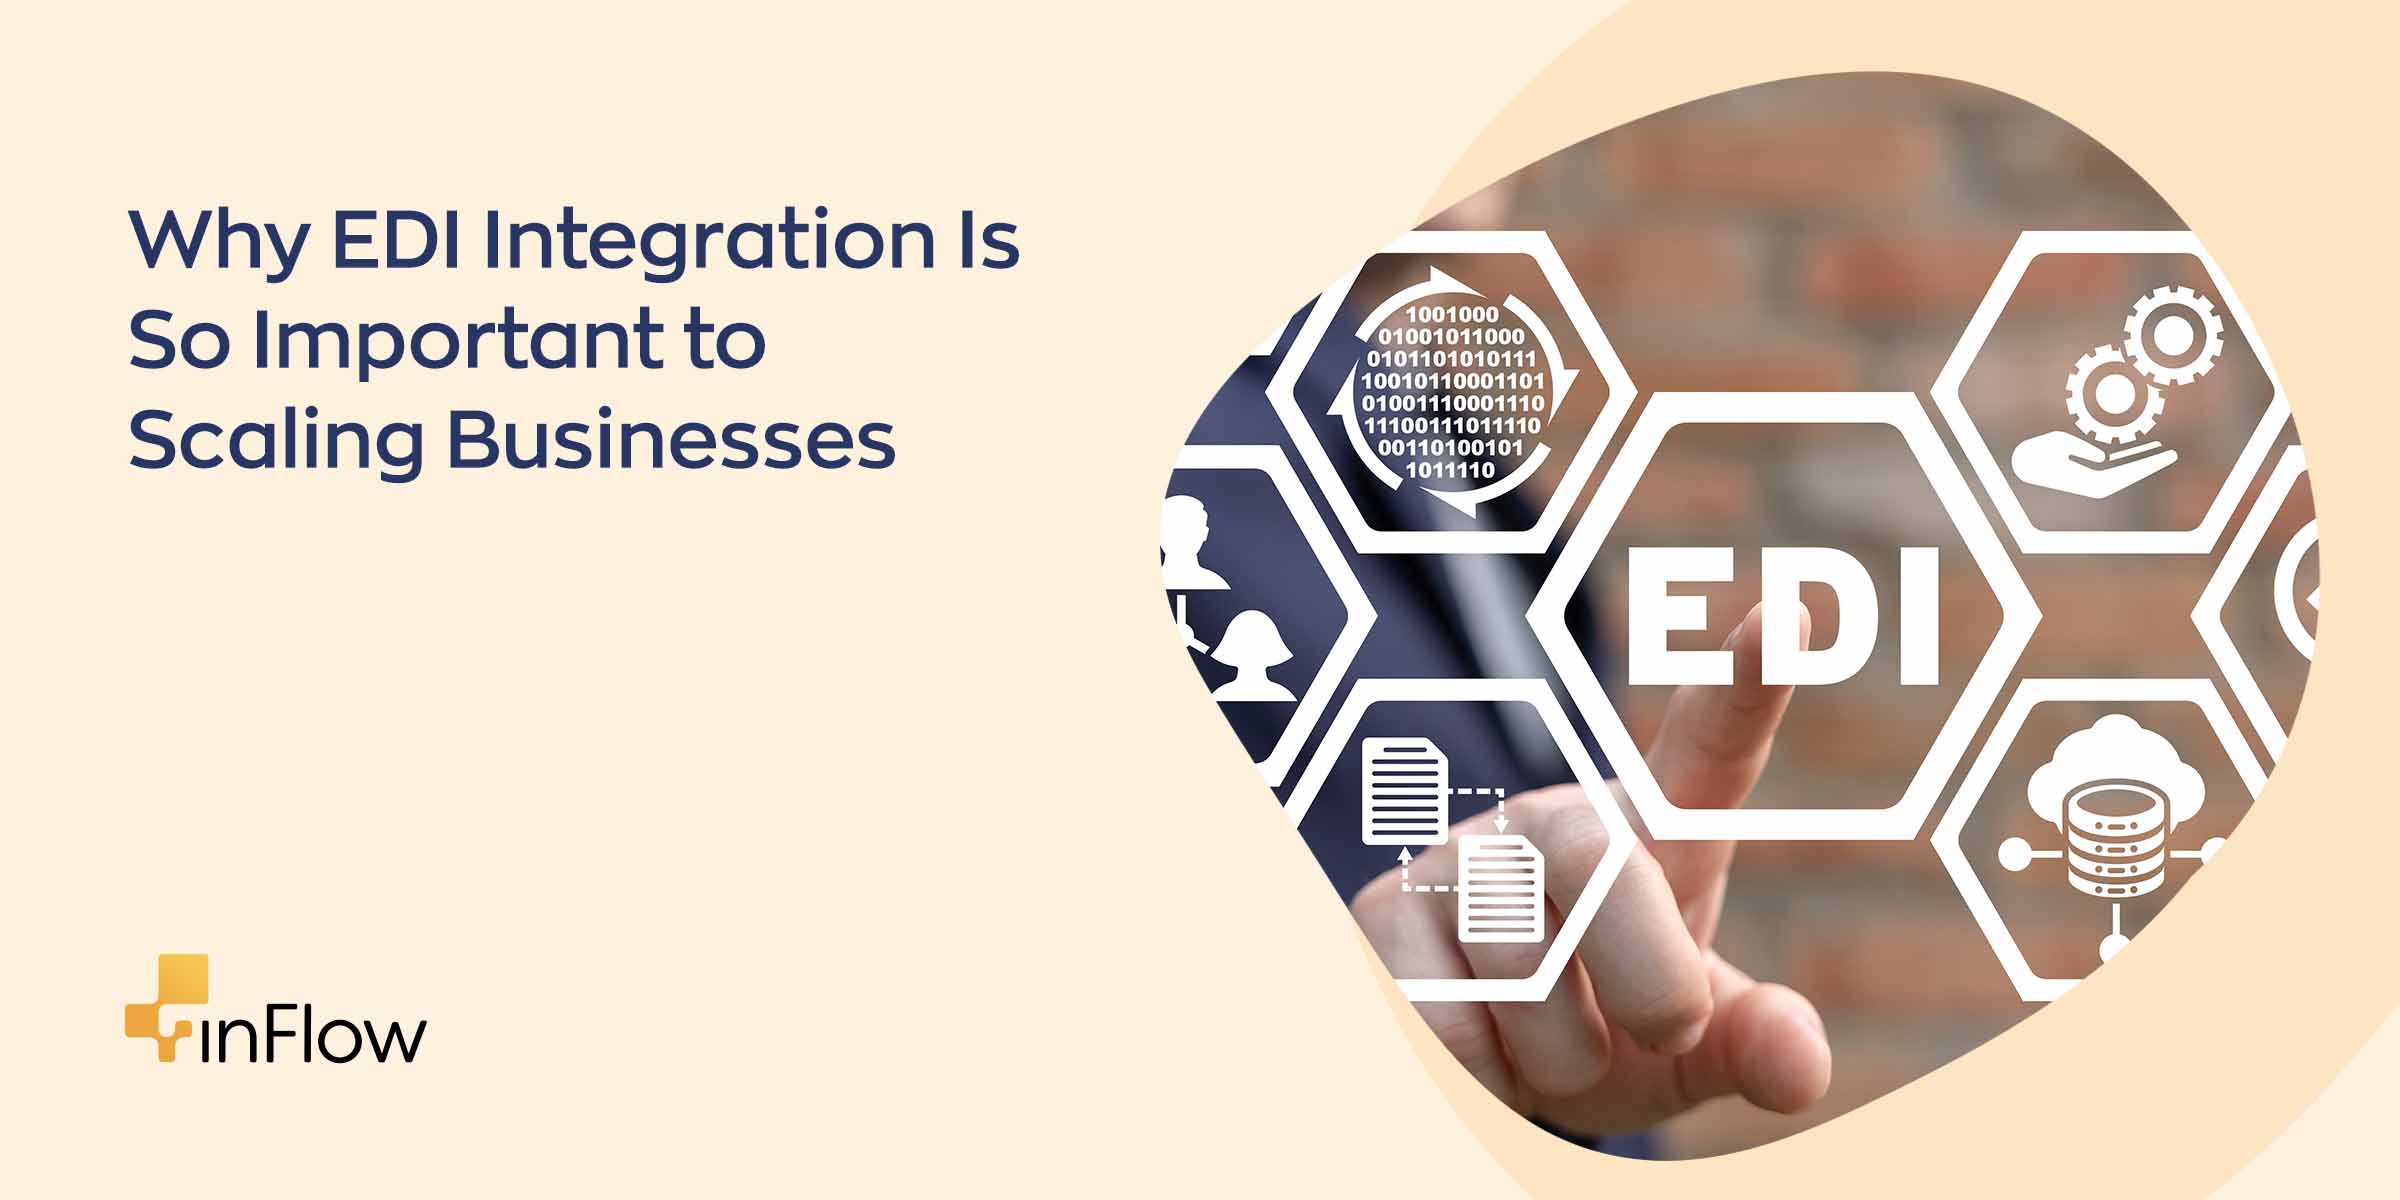 Why EDI Integration Is So Important to Scaling Businesses